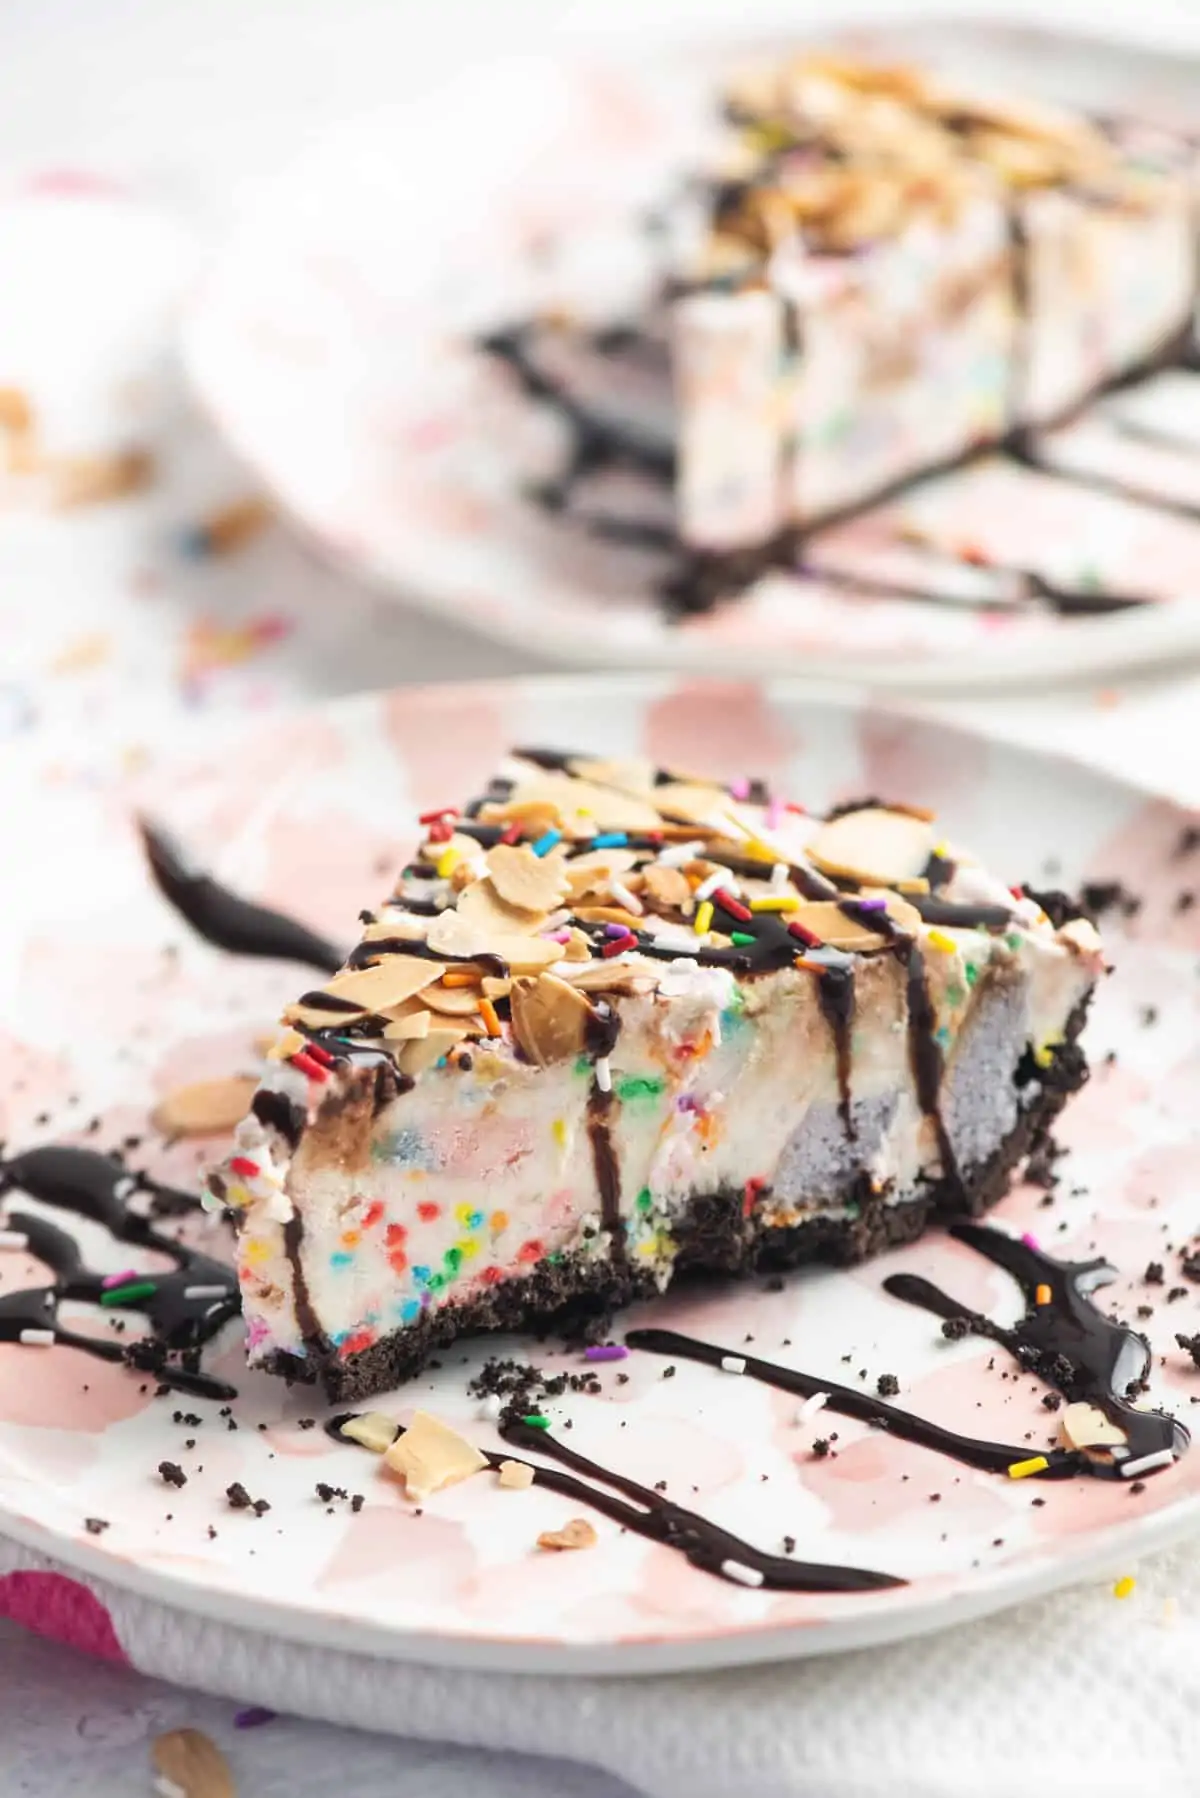 An easy homemade ice cream pie recipe made with a chocolate crust, vanilla ice cream, chunks of cake, chocolate syrup, toasted almonds, and lots of sprinkles. This also makes great birthday party cake, especially for summer. Nothing beats ice cream cake on a hot summer day!